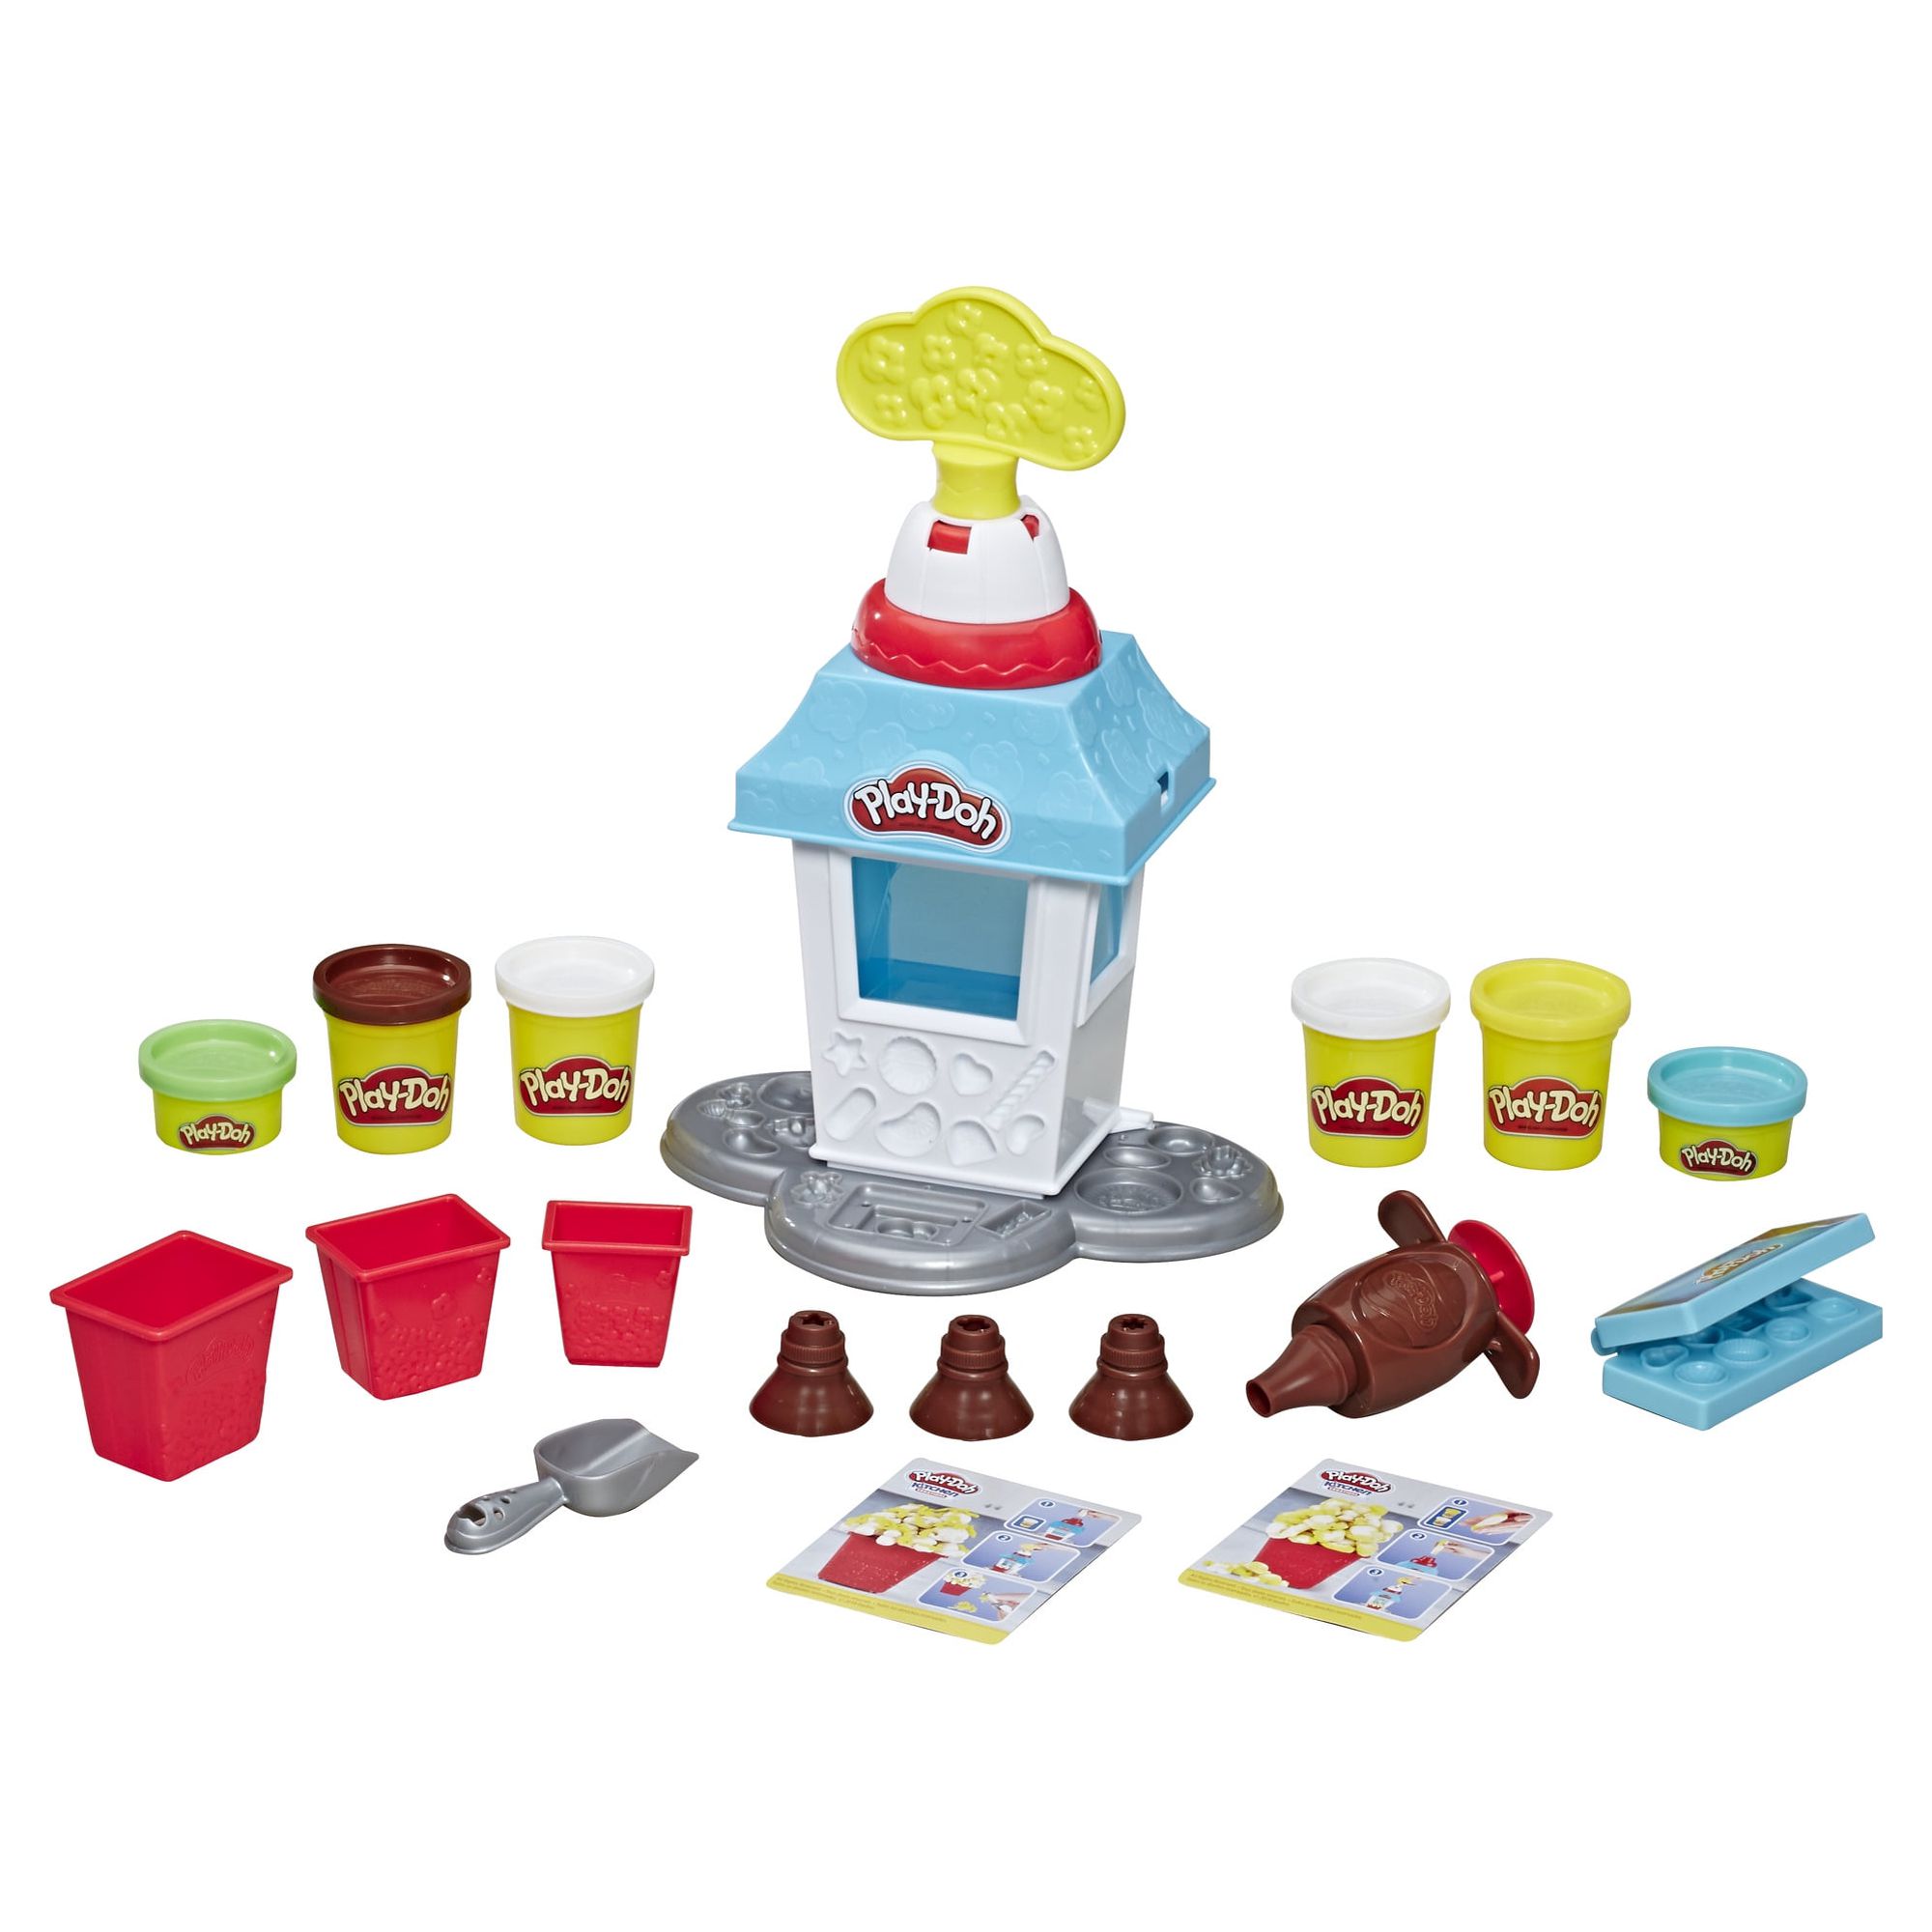 Play-Doh Kitchen Creations Popcorn Party Play Food Set, 6 Cans (10 oz) - image 4 of 15